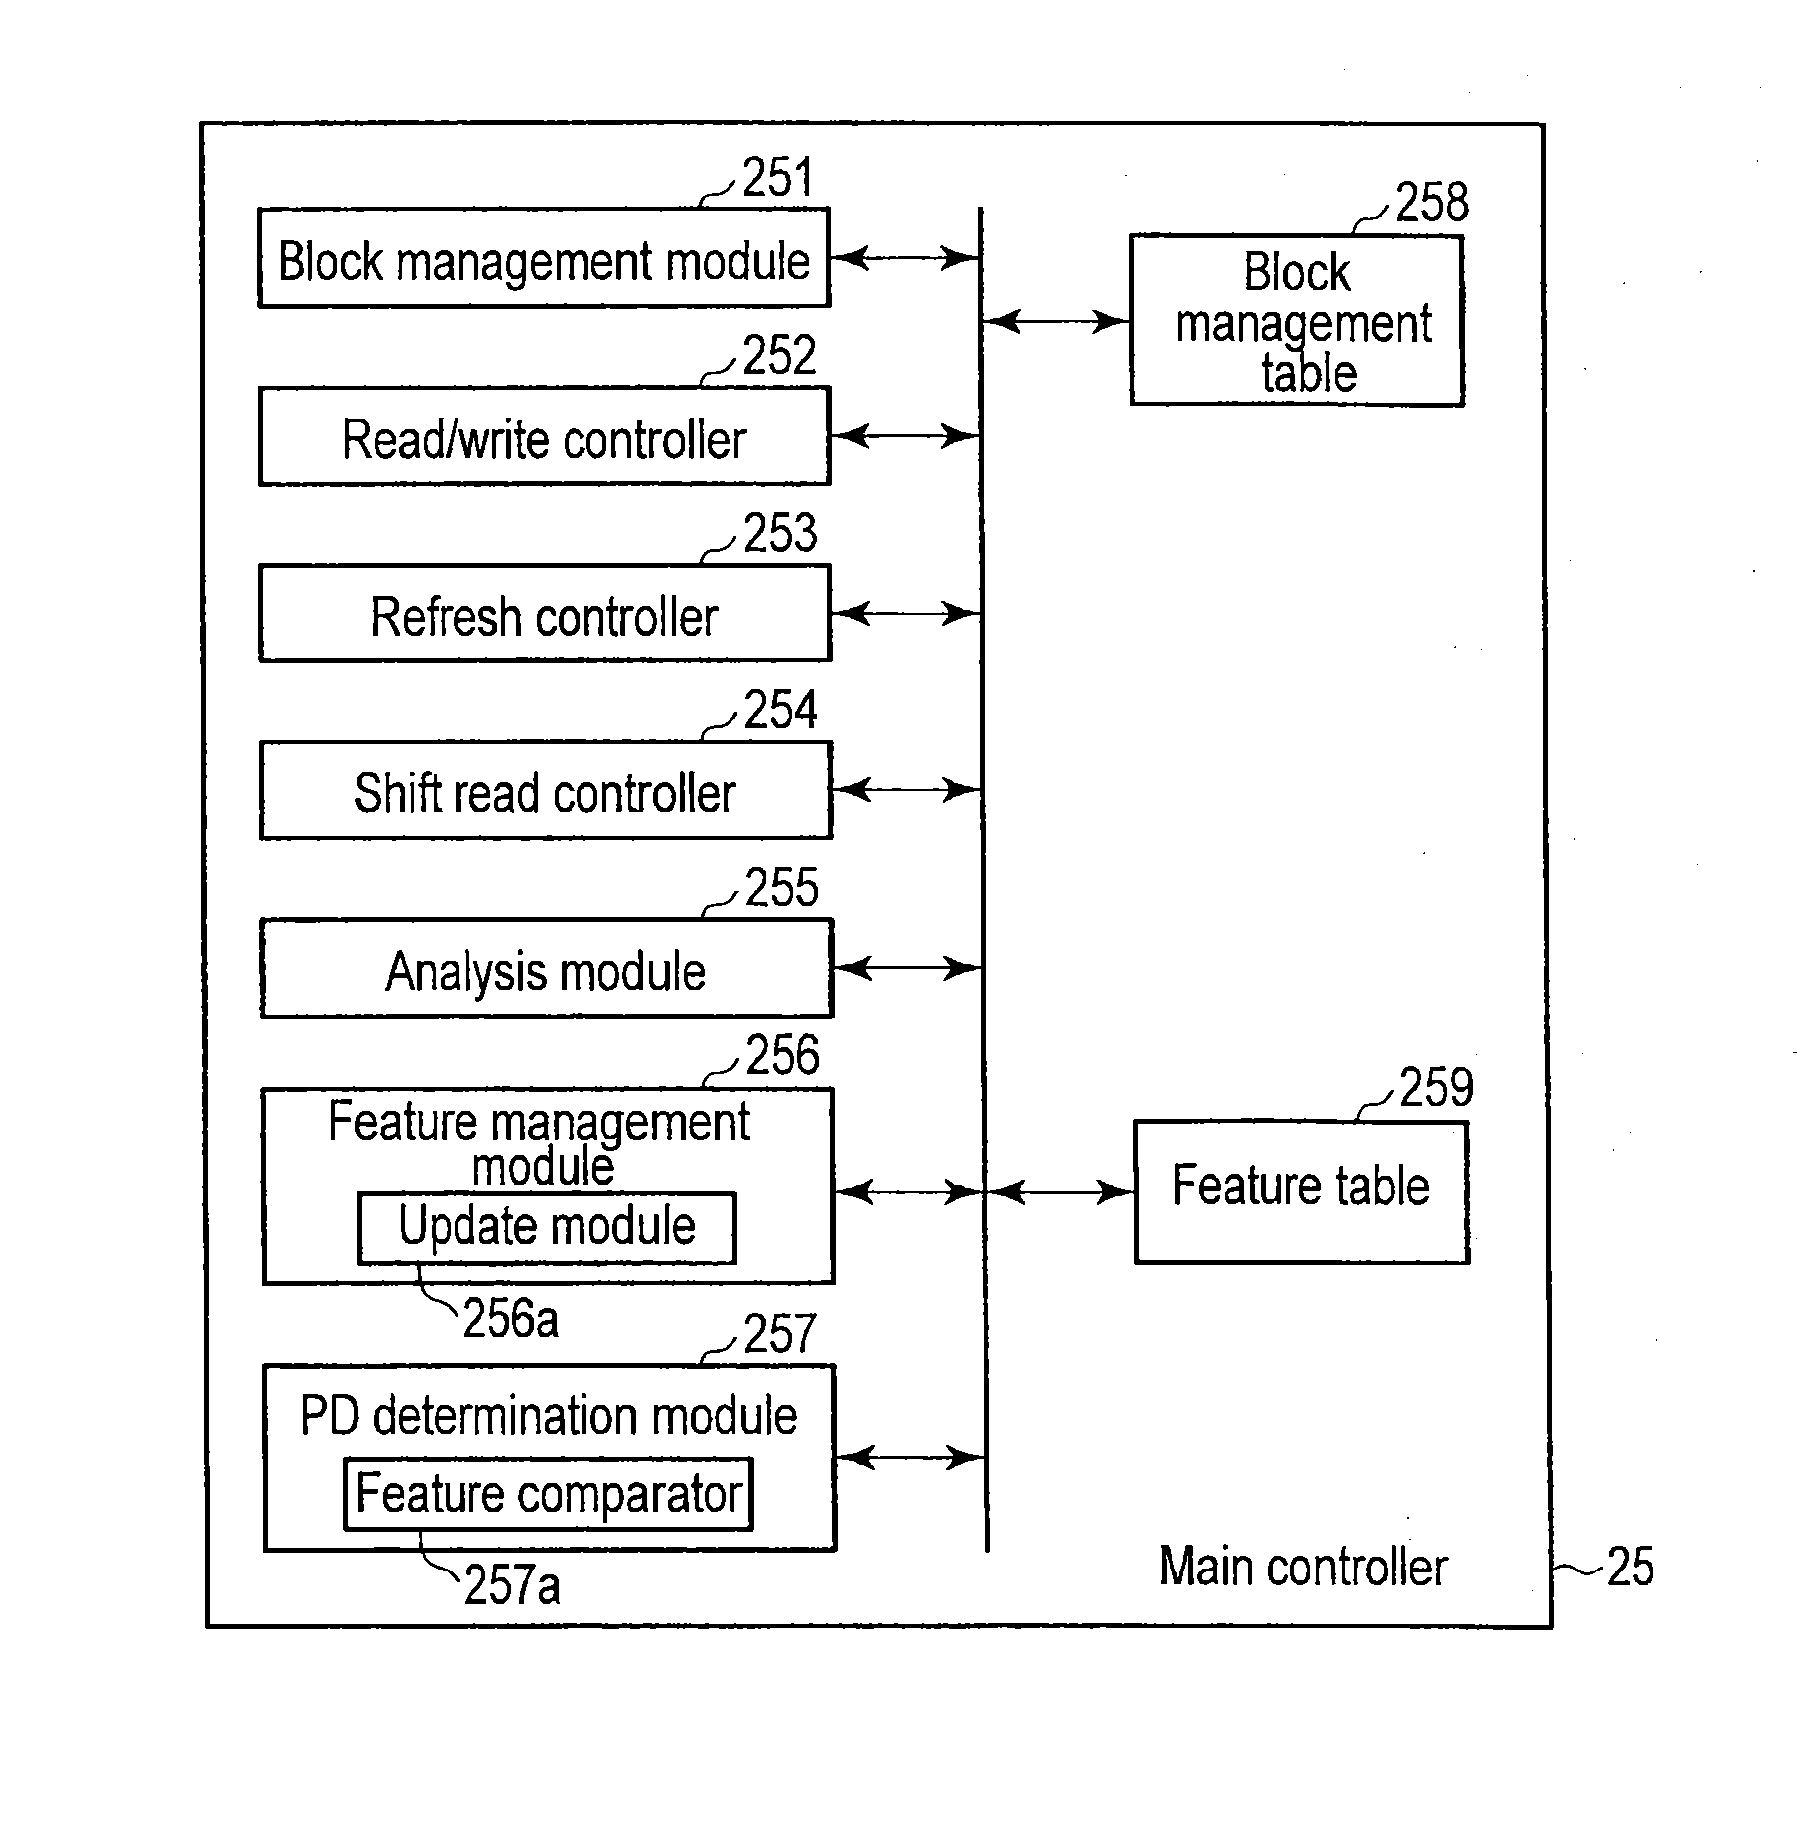 Memory system having nand-type flash memory and memory controller used in the system